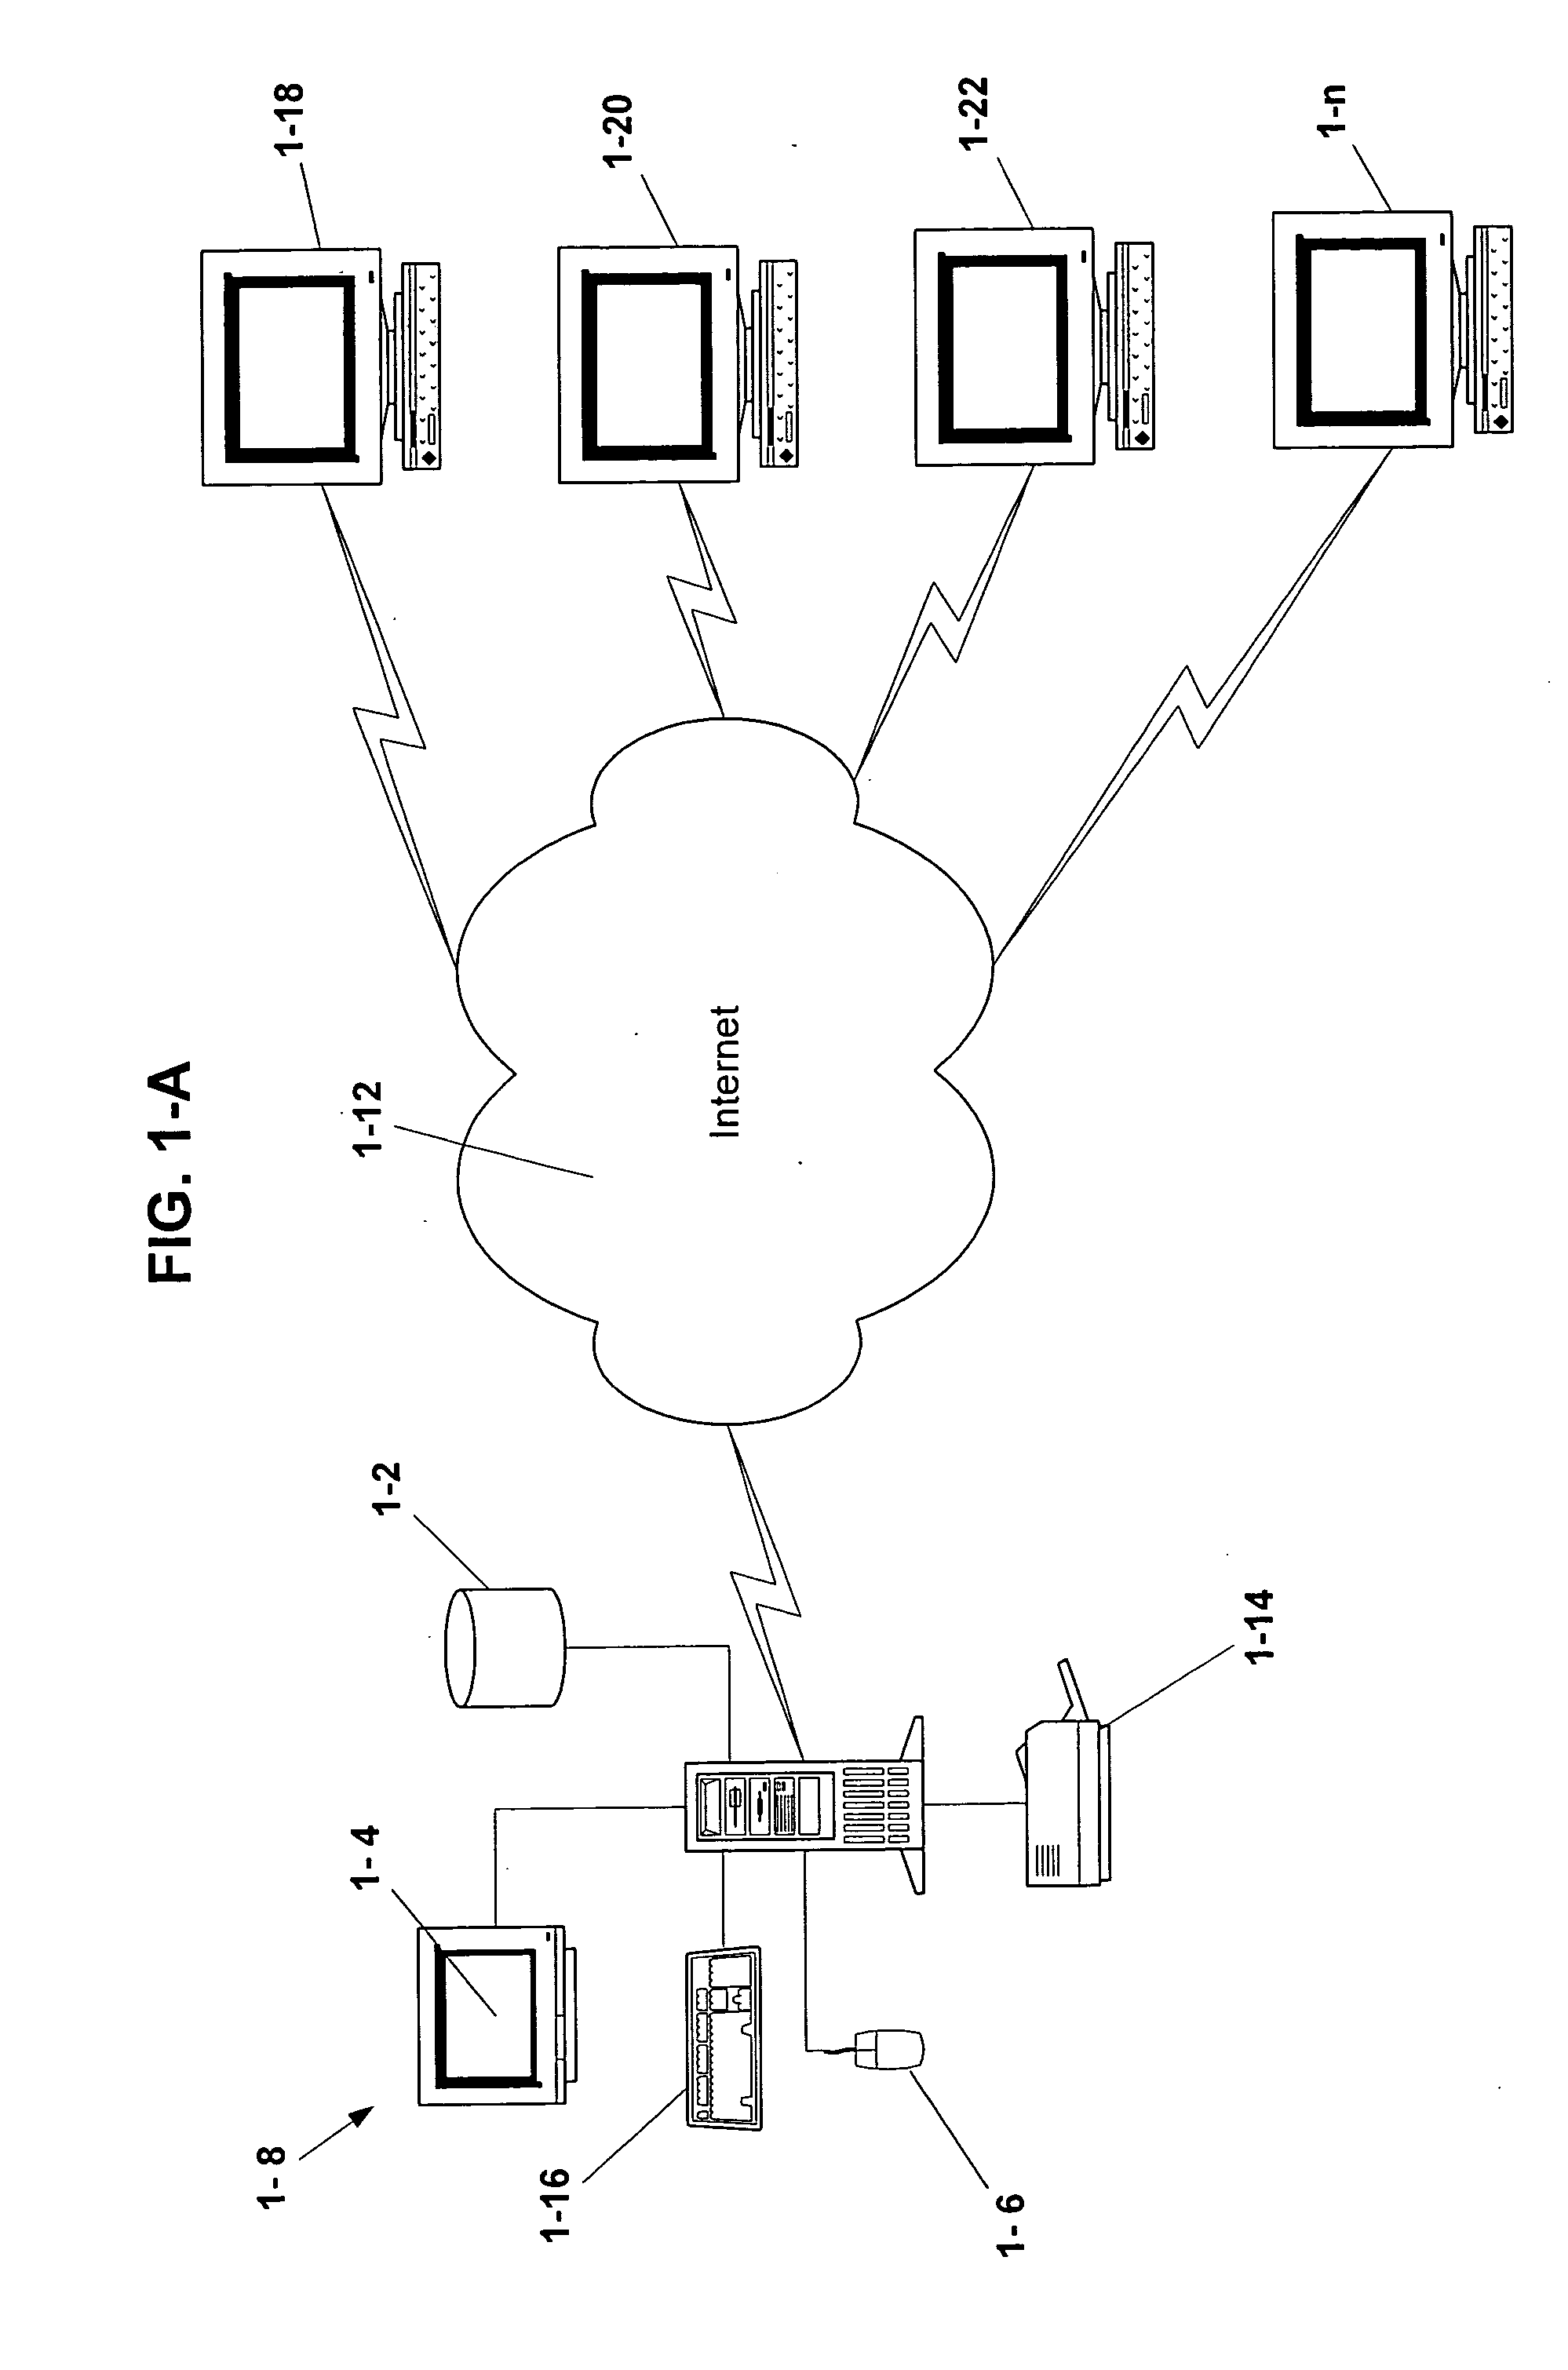 System for creating and maintaining a database of information utilizing user opinions